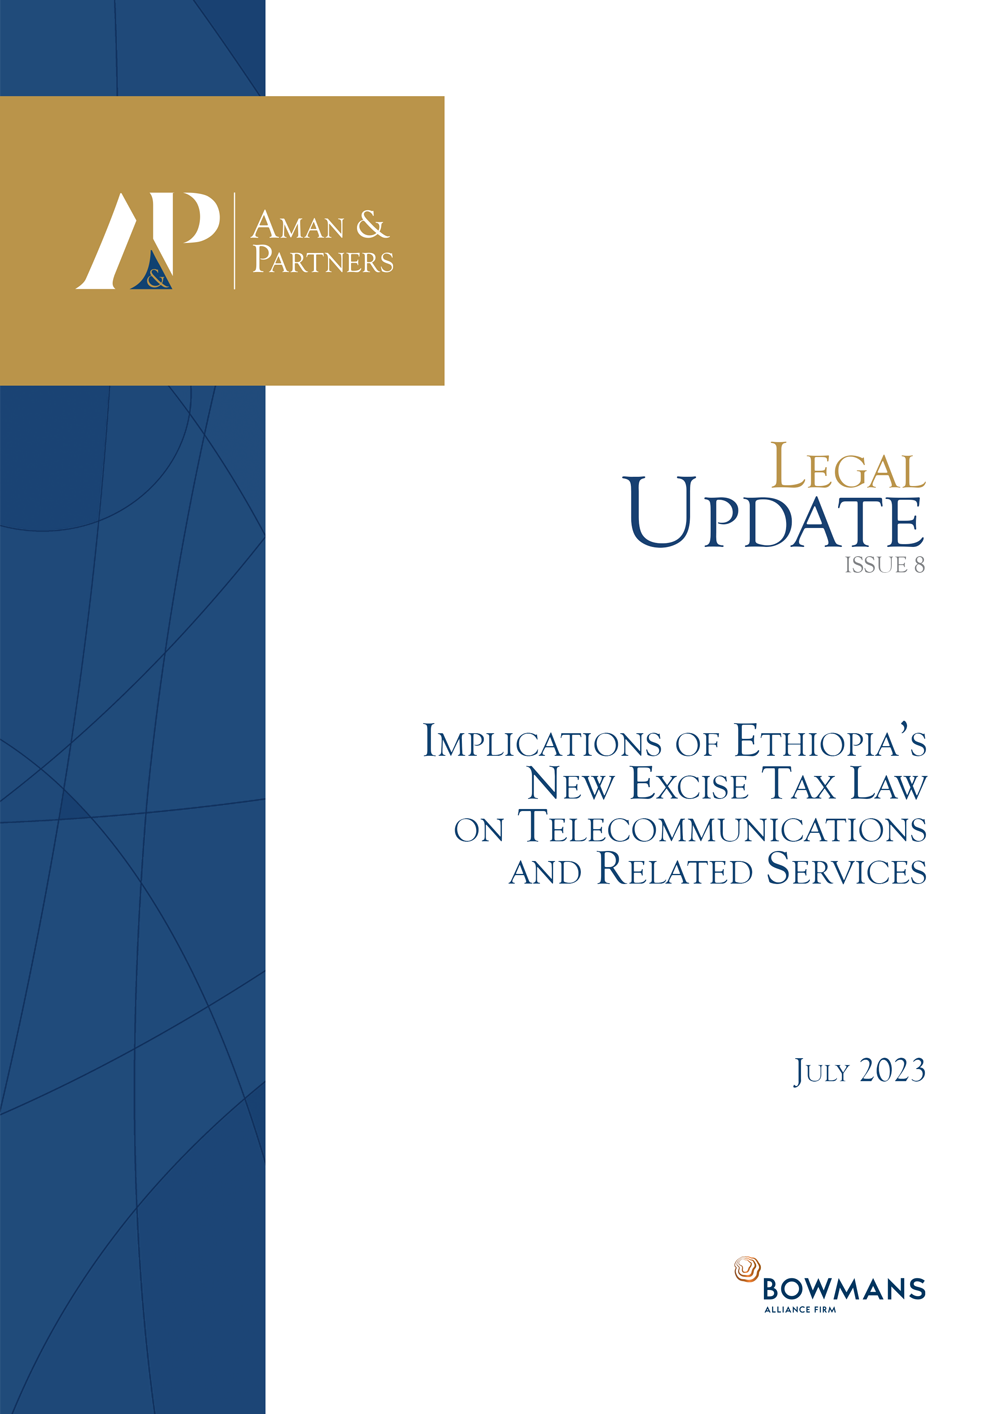 Implications of Ethiopia’s New Excise Tax Law on Telecommunications and Related Services